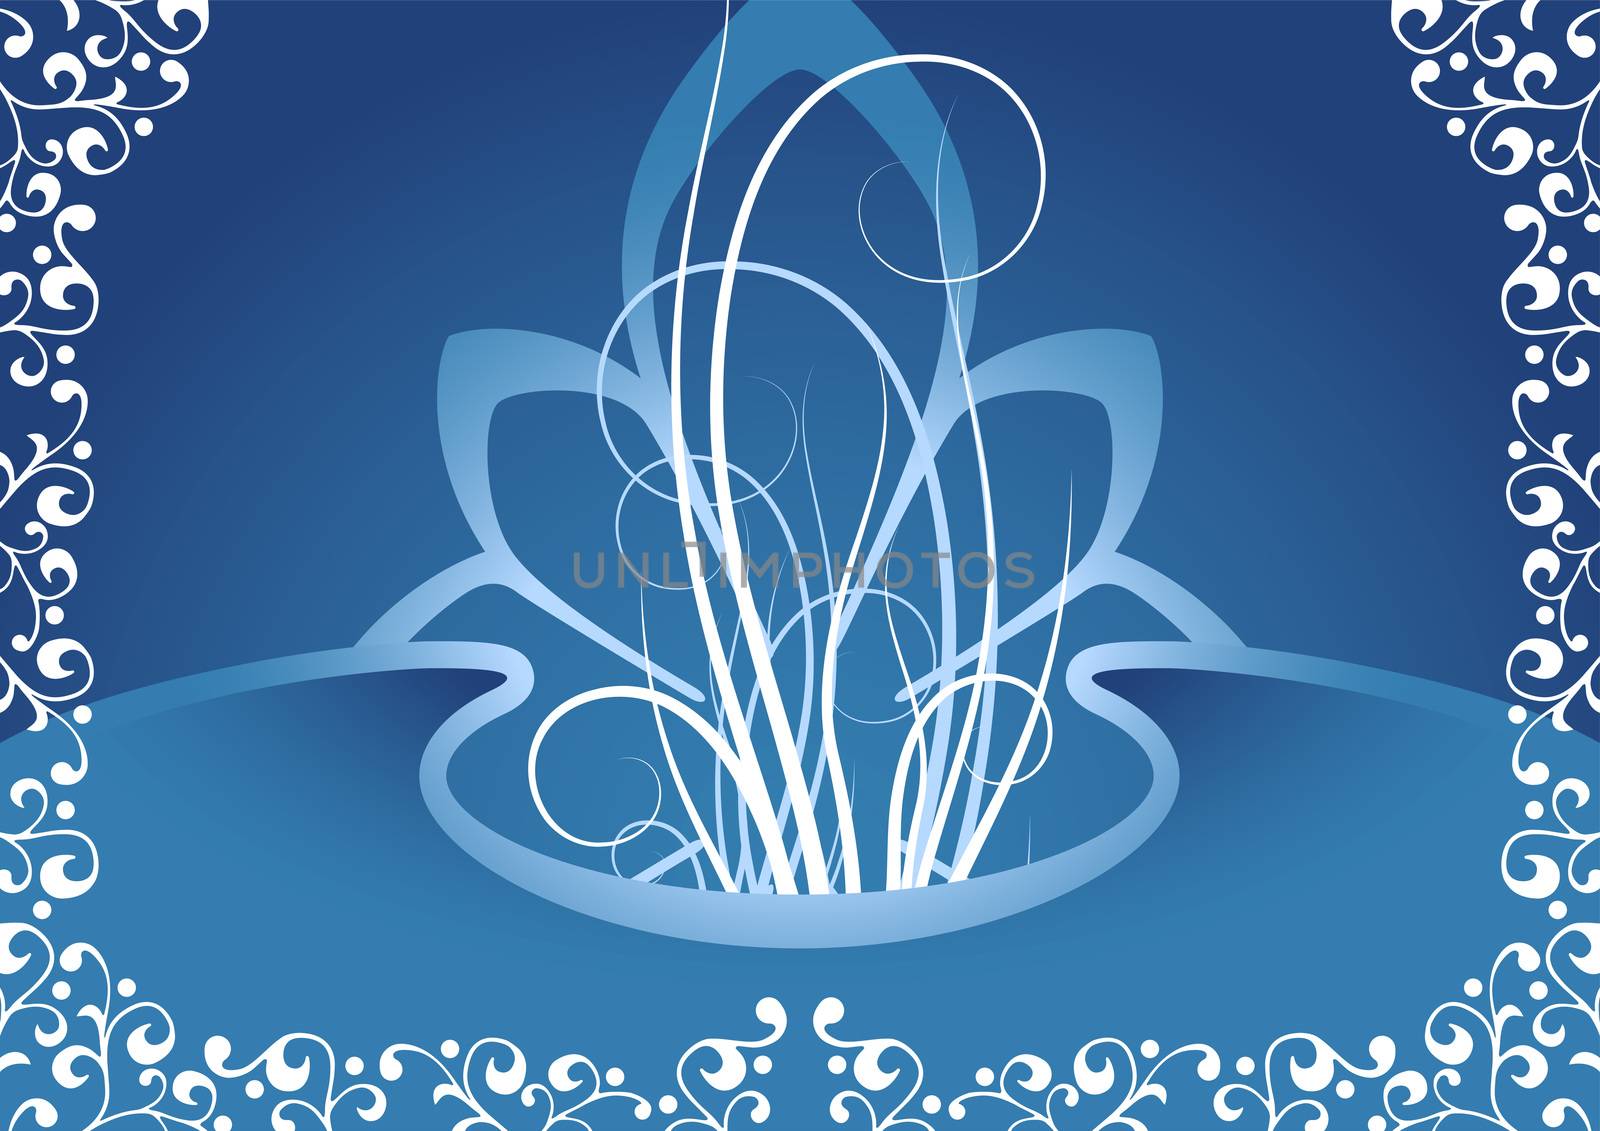 creative background with floral elements in blue color, vector i by WaD